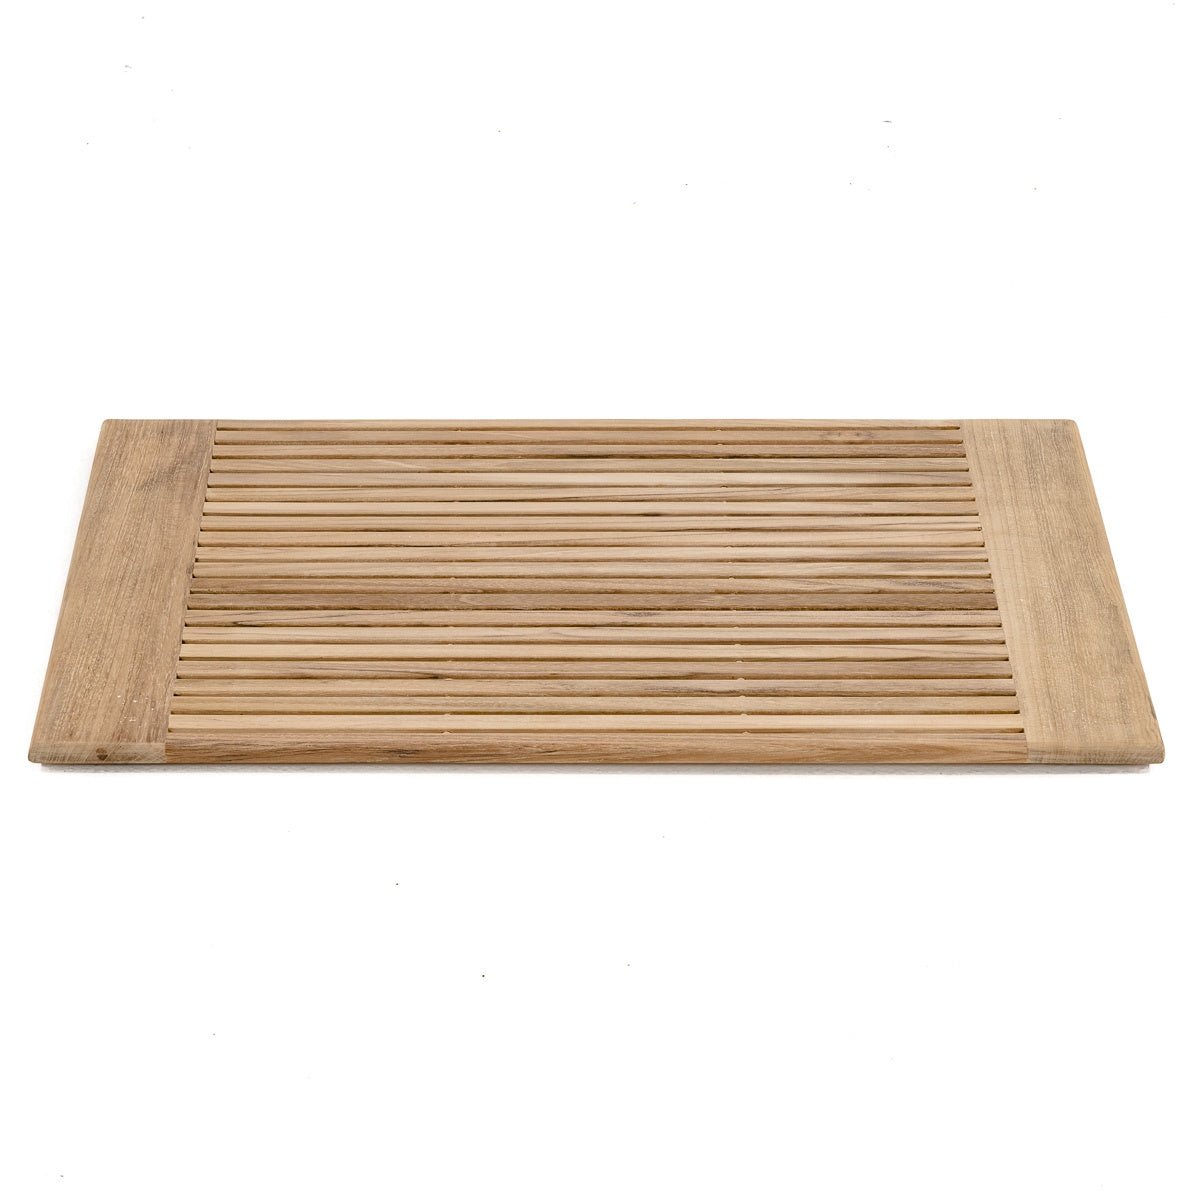 Westminster Teak - Pacifica Bath Mat 24 inches by 16 inches - 18421